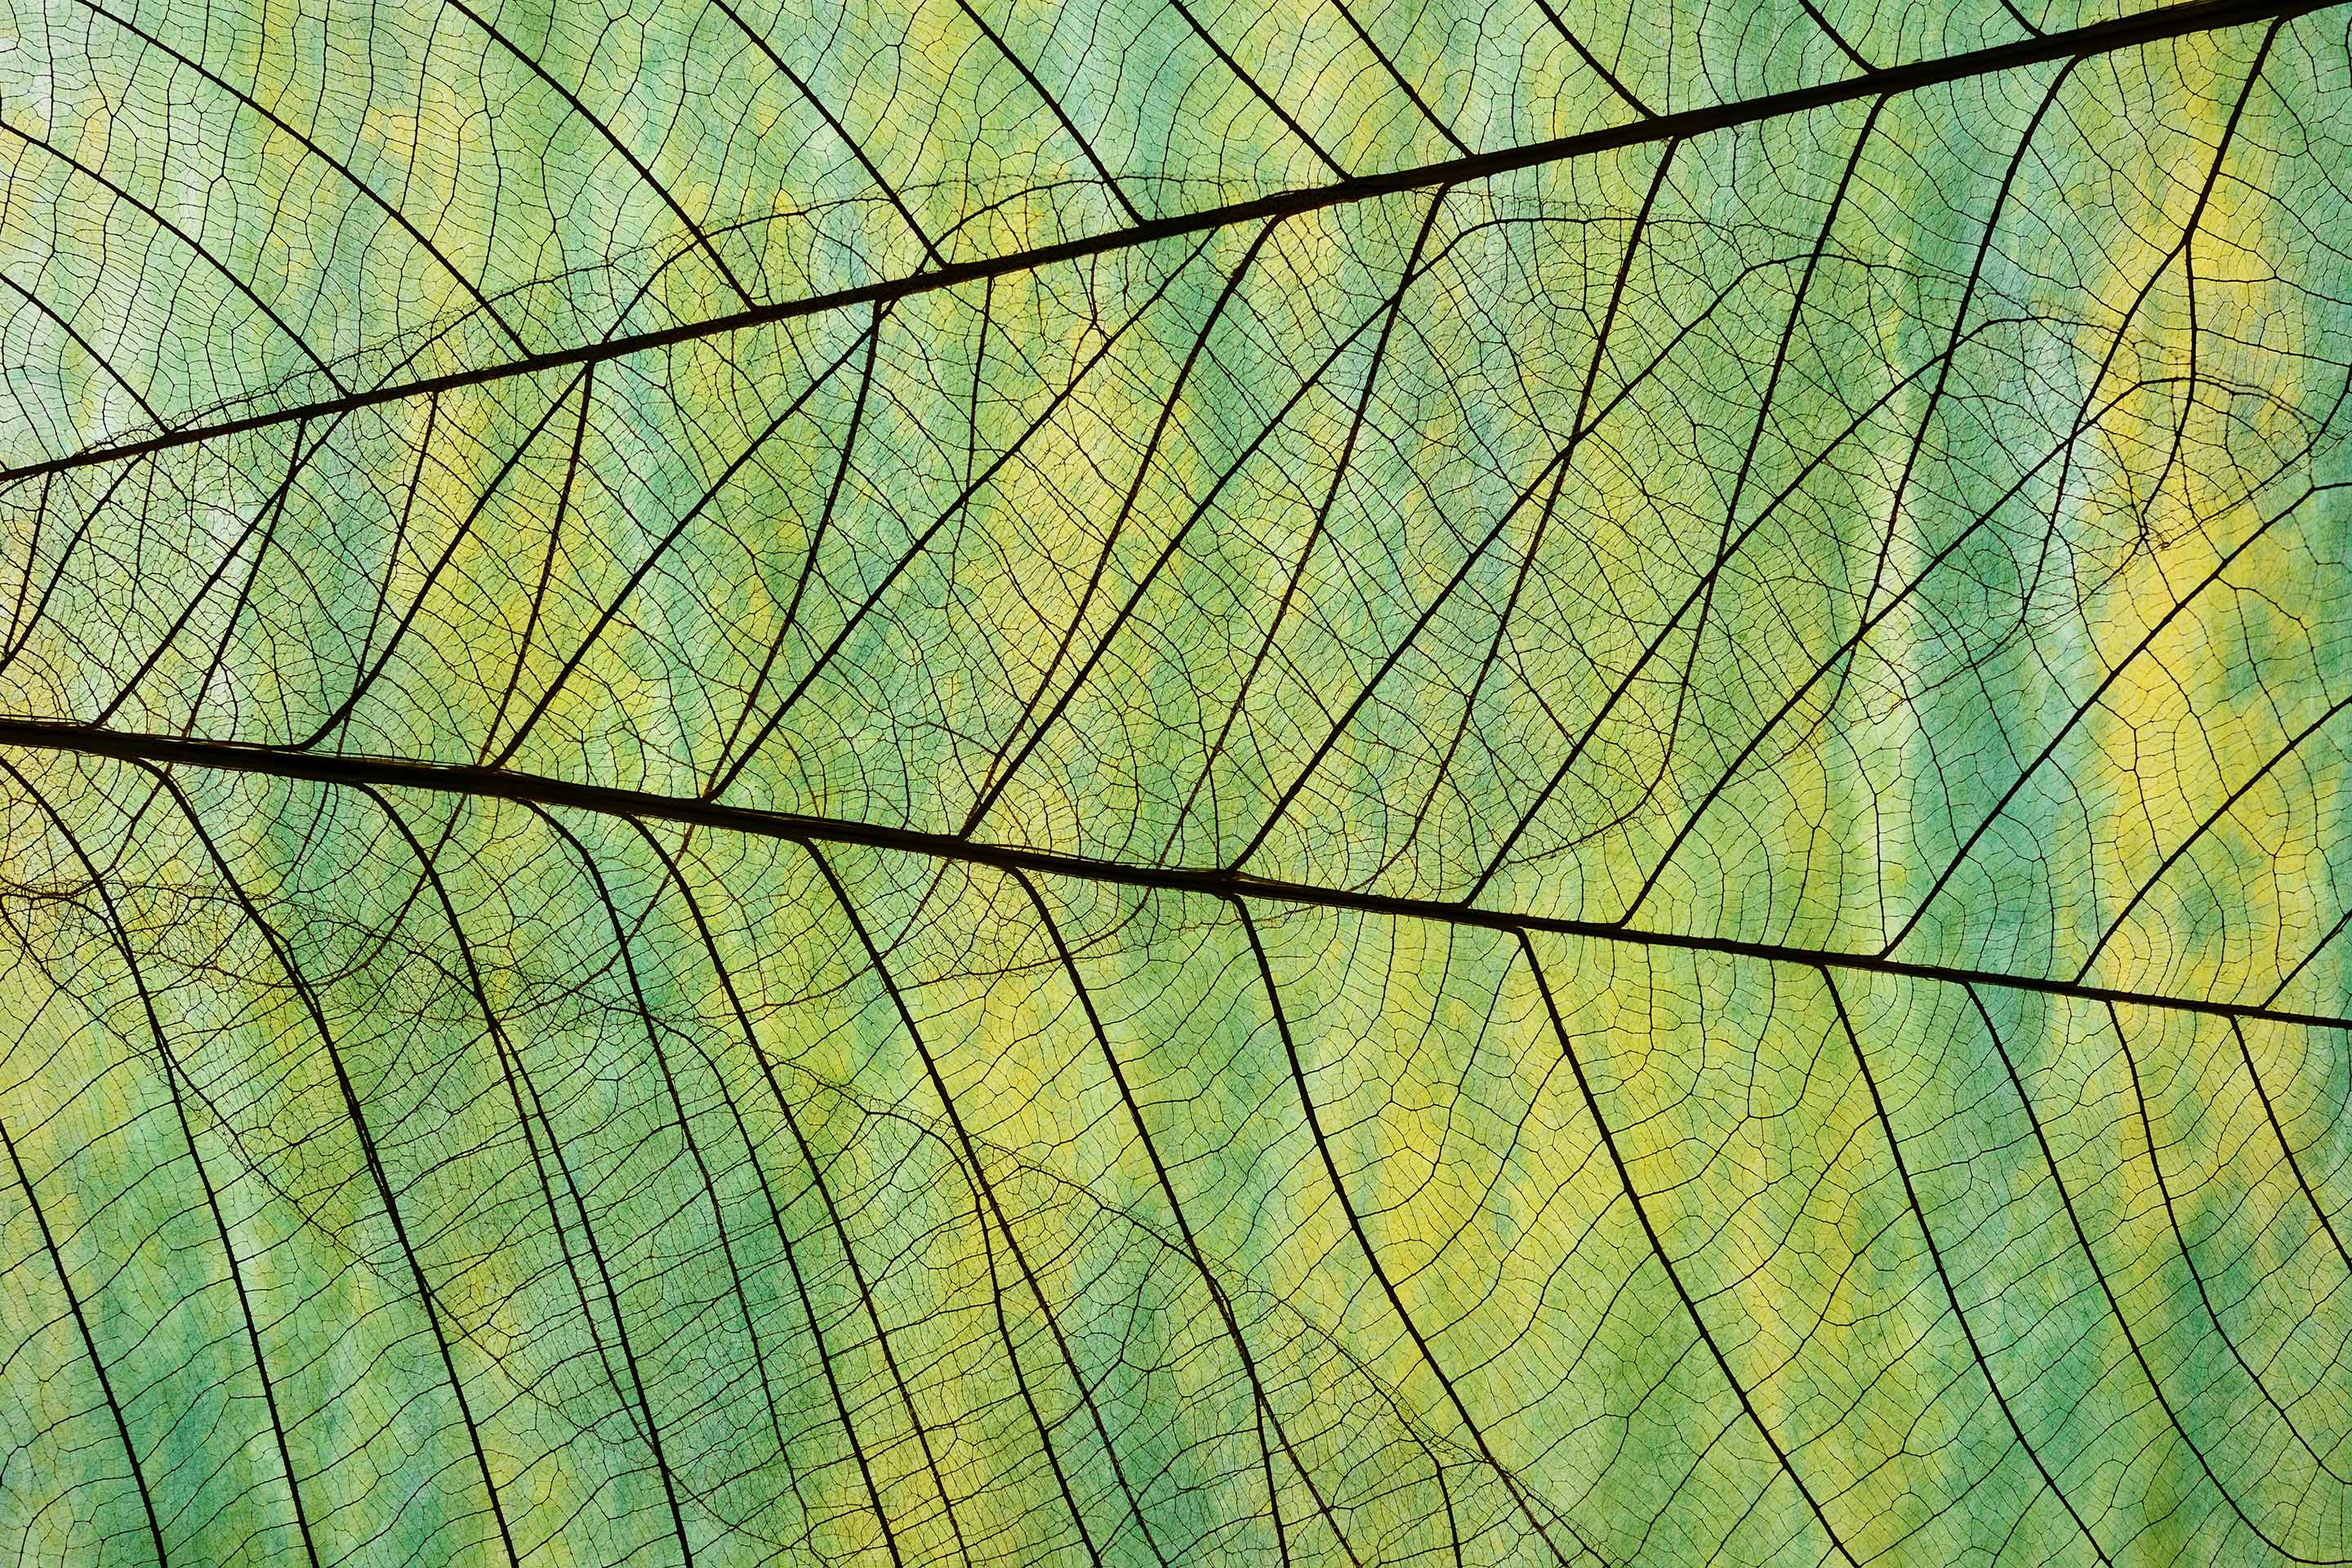 Close up of the connecting veins of a leaf as a representation of sustainability.